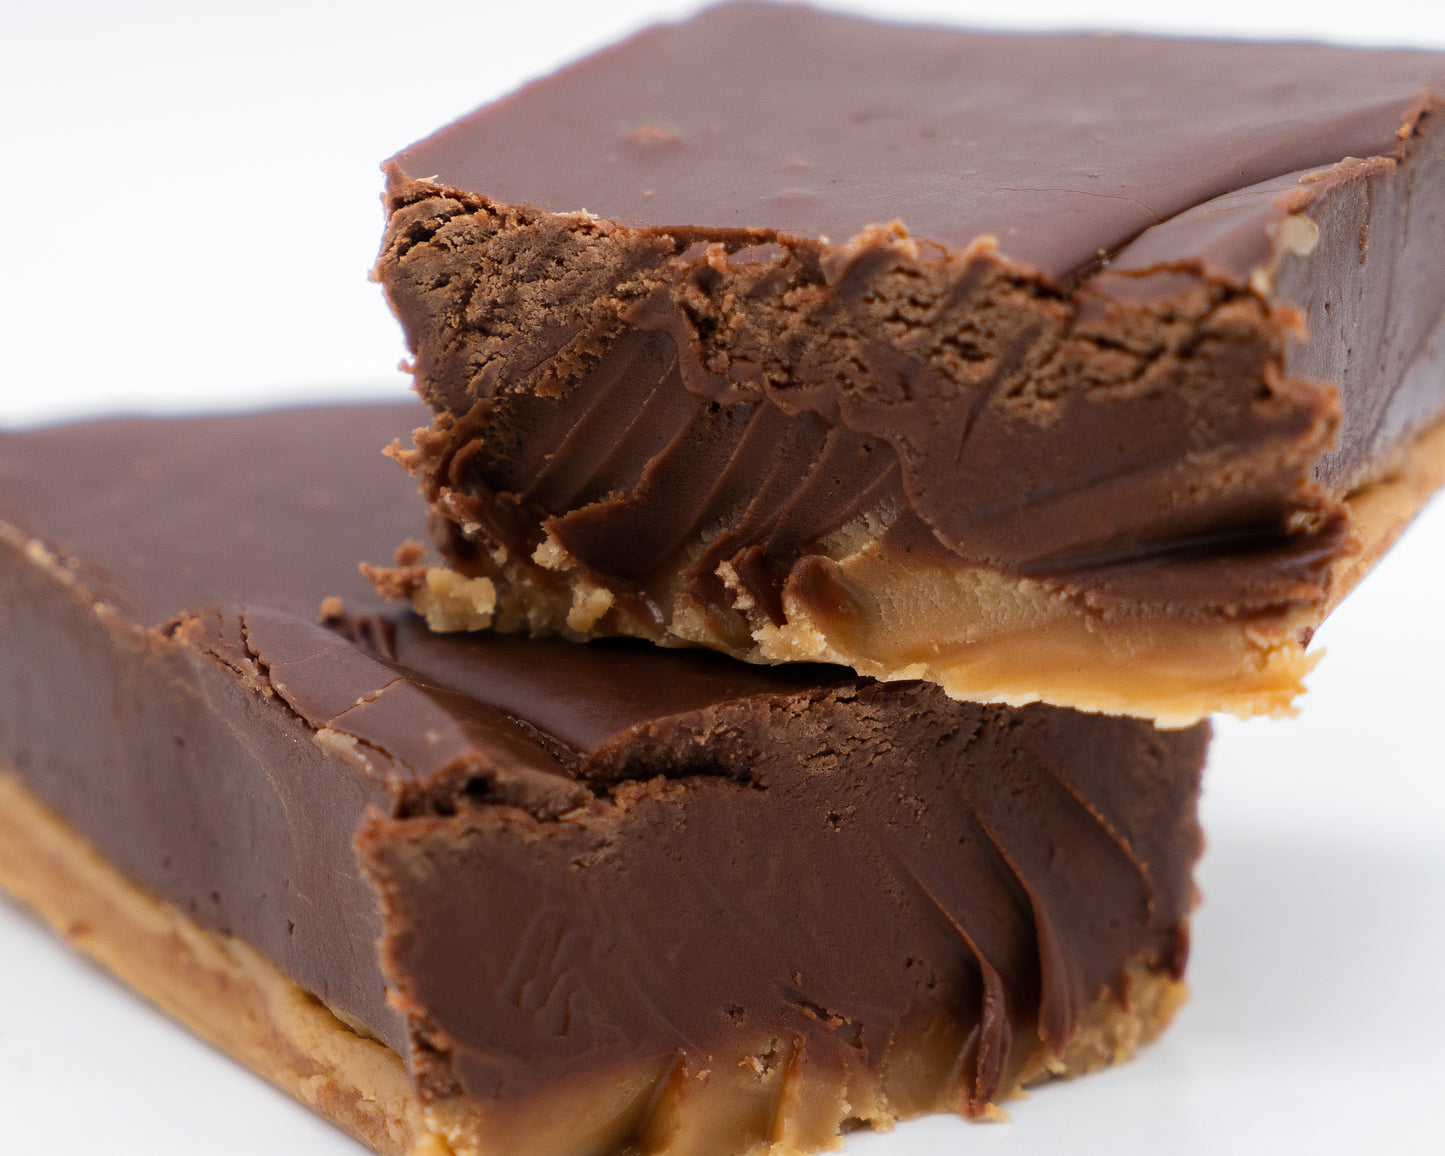 Chocolate Peanut Butter Fudge from Stage Stop Candy